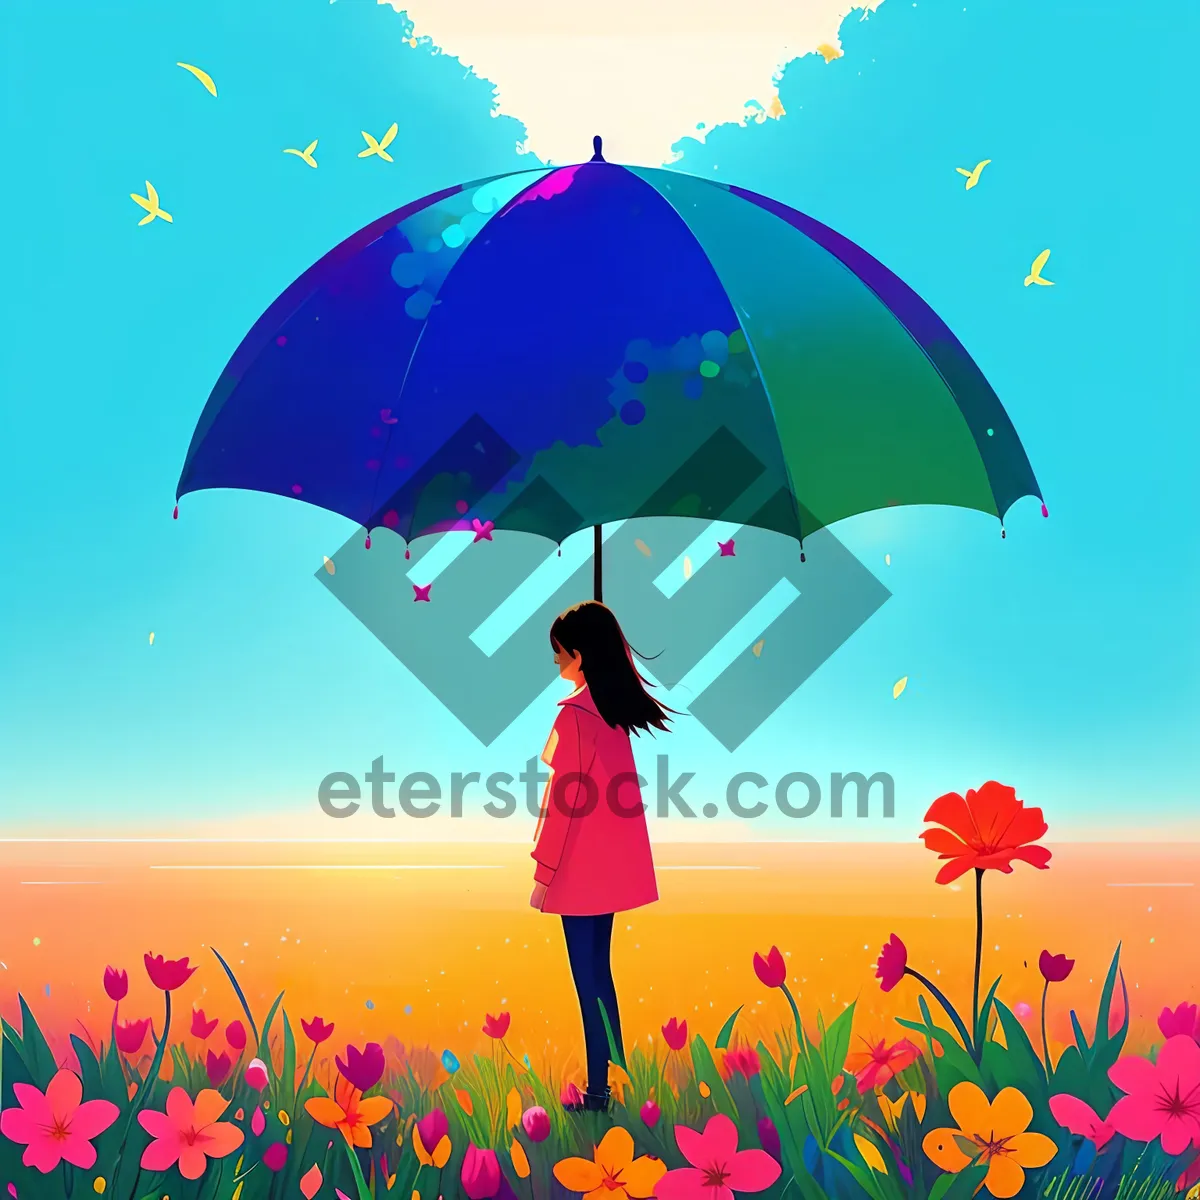 Picture of Summer Sky Canopy: Shelter from Rain with Umbrella